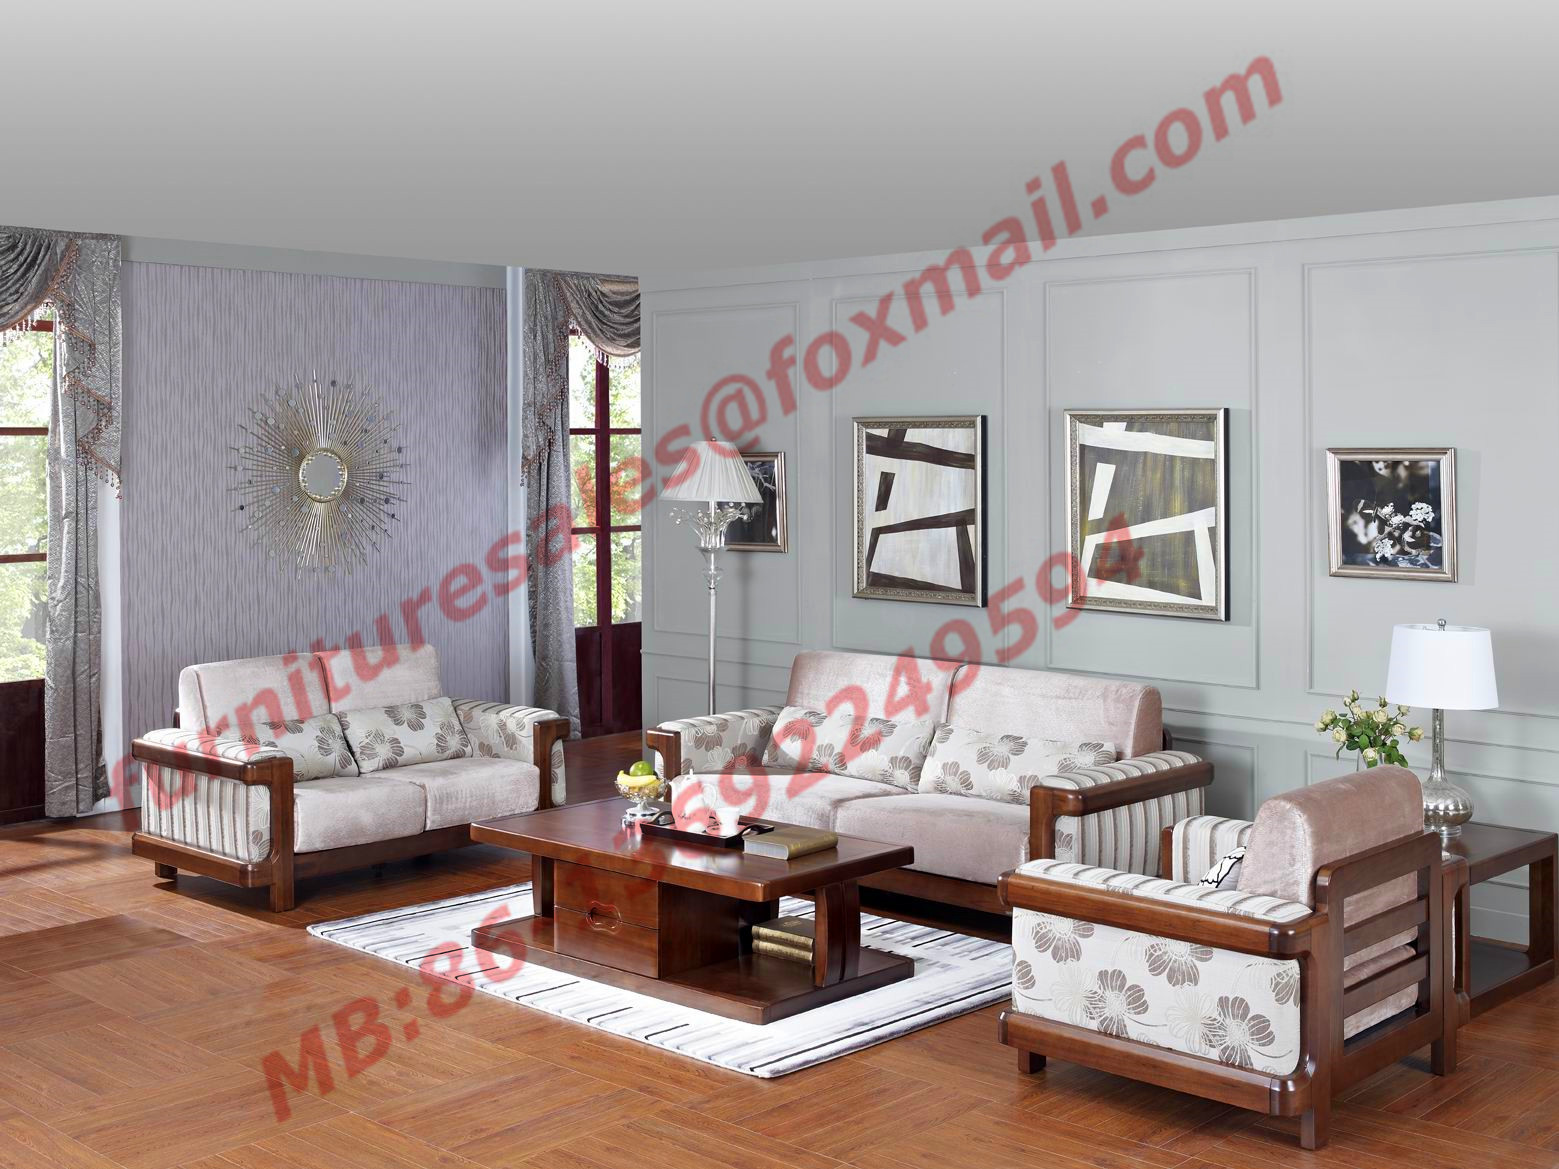  High Quality 1+2+3 Wooden Sofa Set from Shenzhen Right Home Furniture in Shenzhen China Manufactures